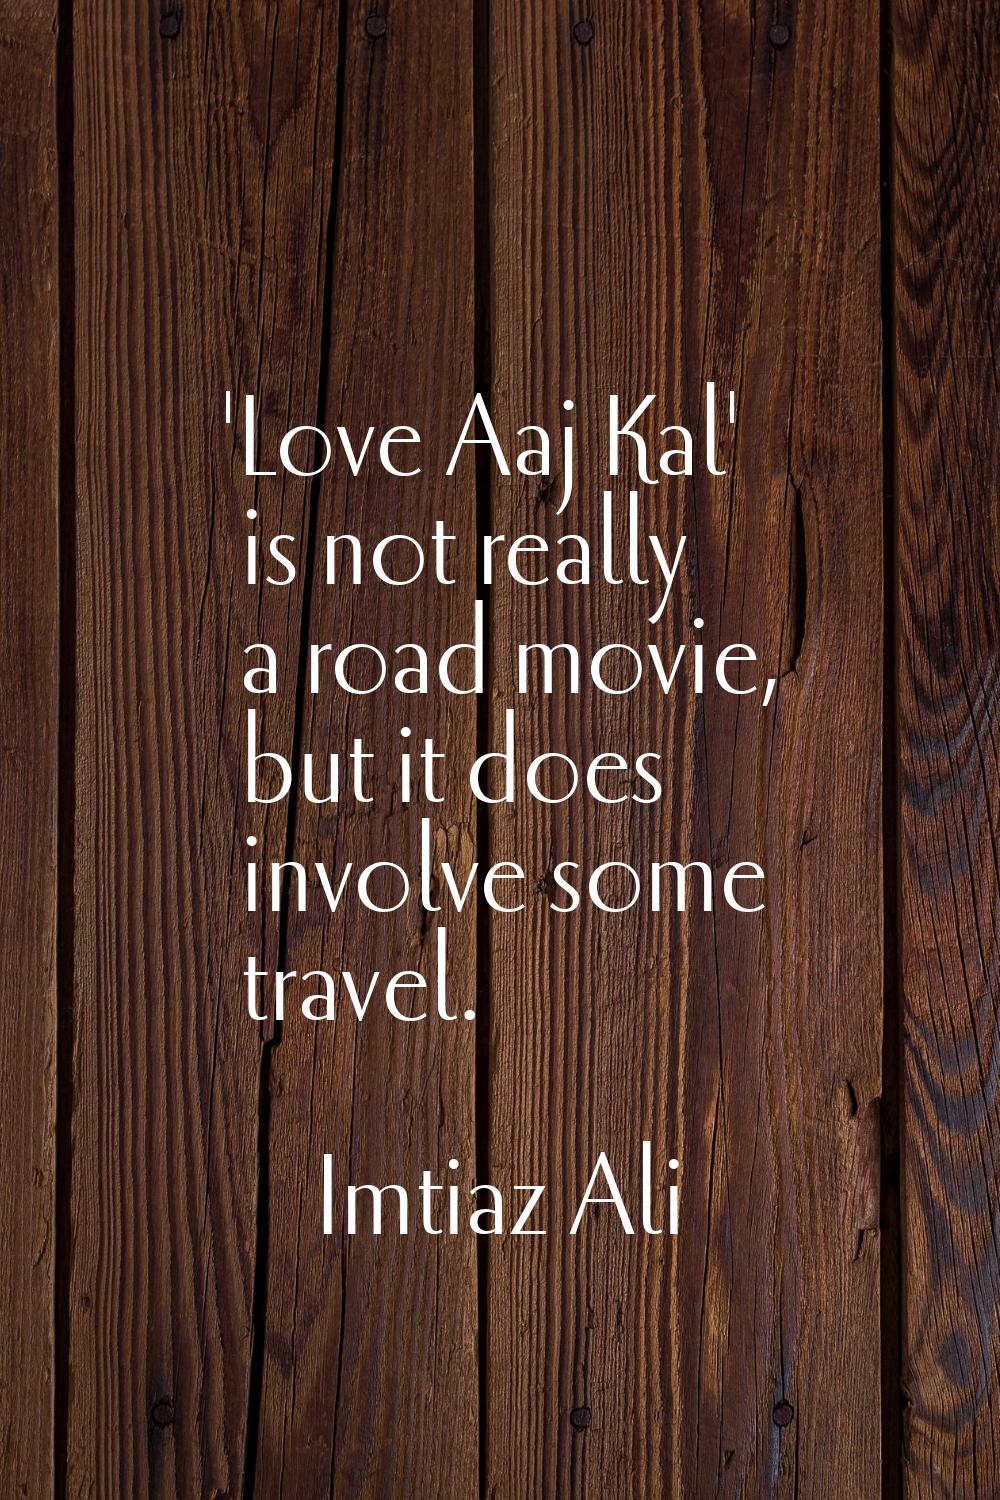 'Love Aaj Kal' is not really a road movie, but it does involve some travel.